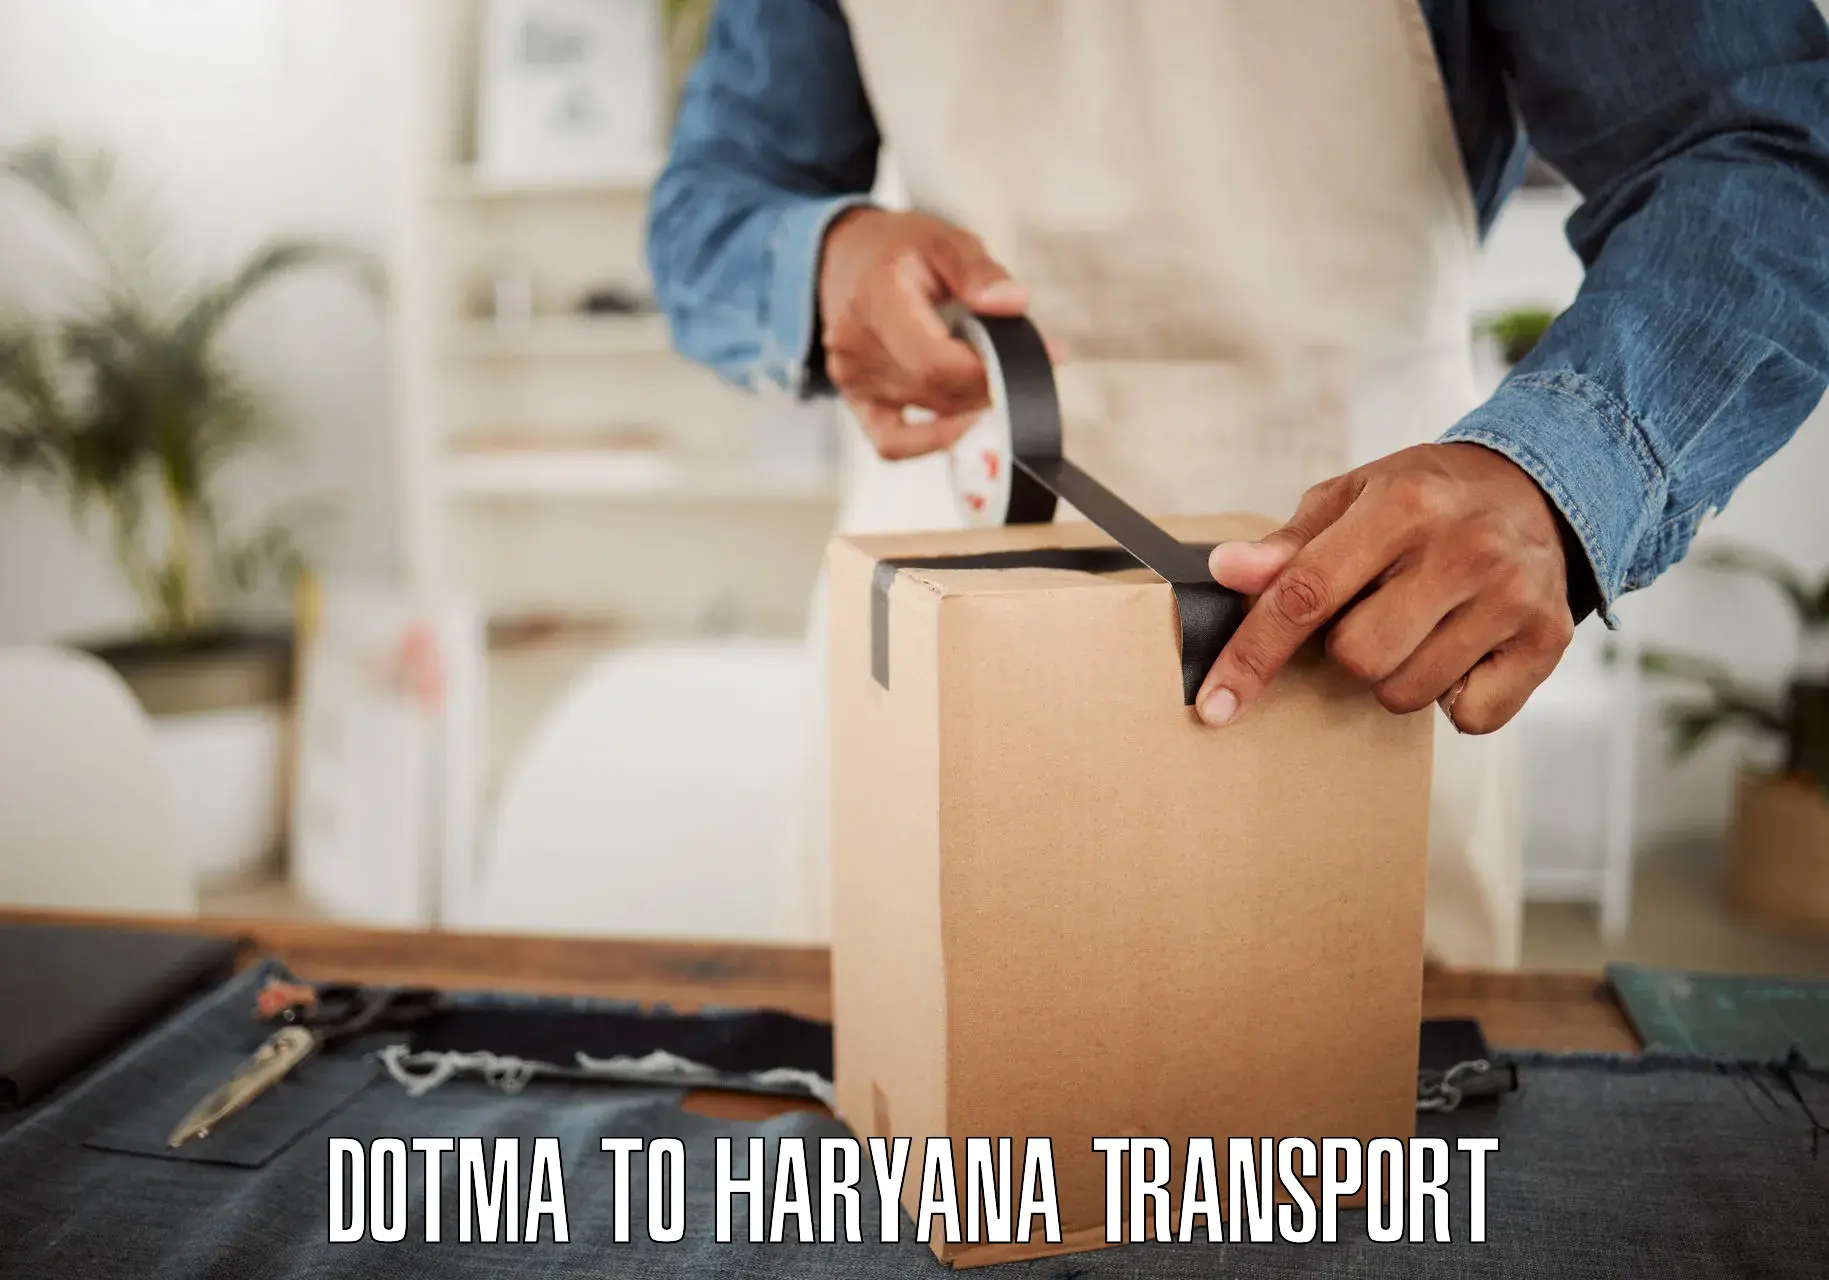 Land transport services in Dotma to Odhan